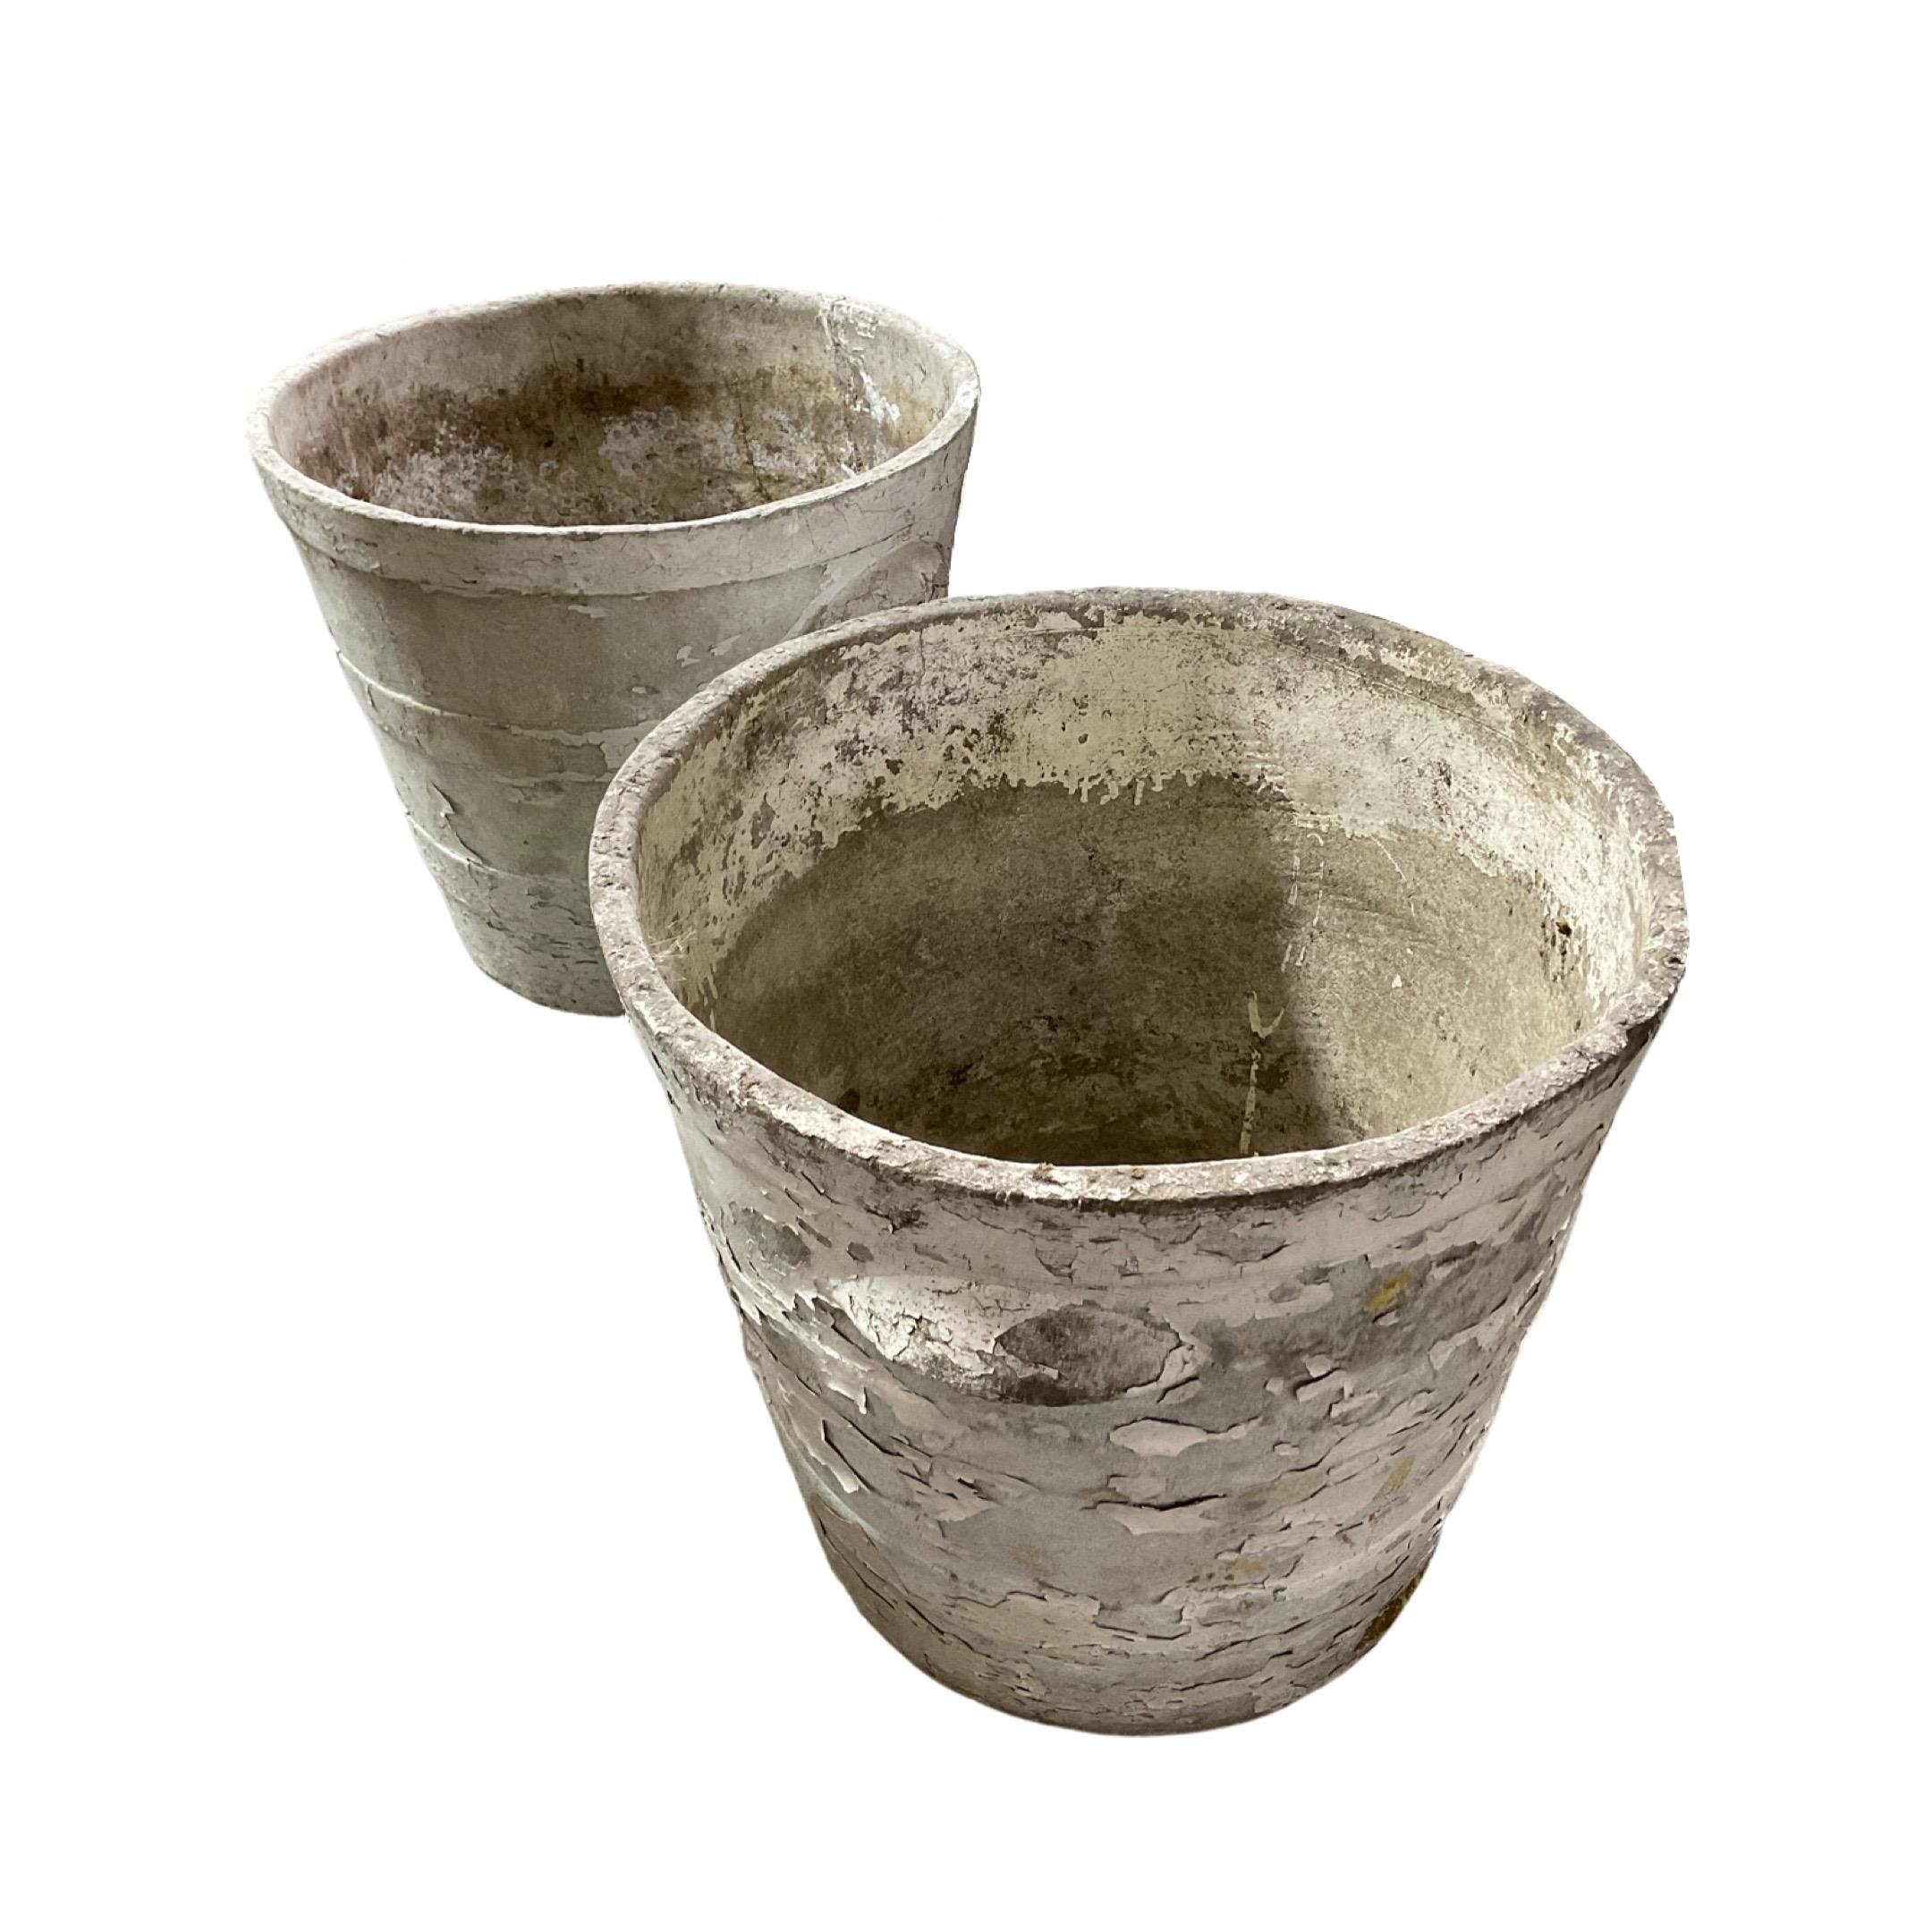 Pair of concrete planters made out of a concrete composite. Originates from Switzerland. Circa, 1950's. Designed by Willy Guhl. Sold as a pair.